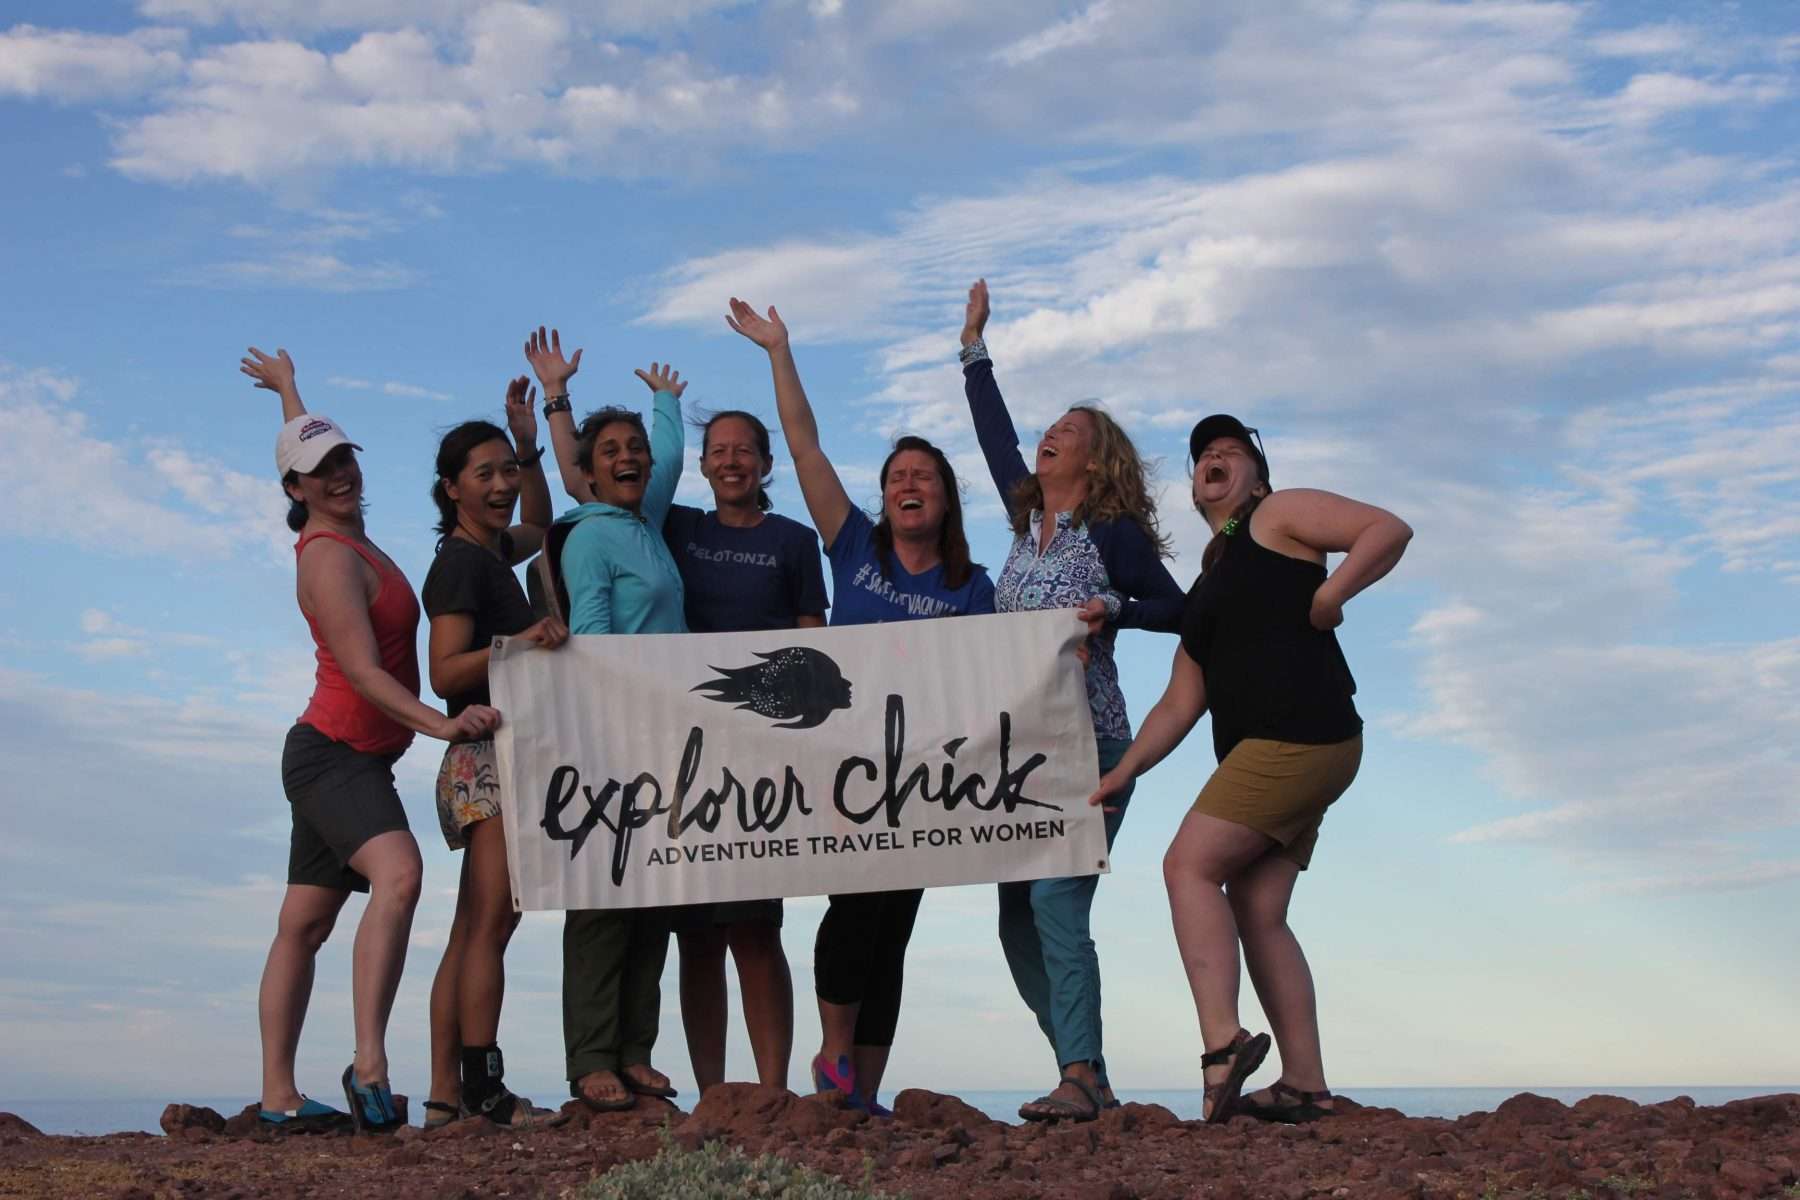 Women holding a banner from the guided tour travel company Explorer Chick.